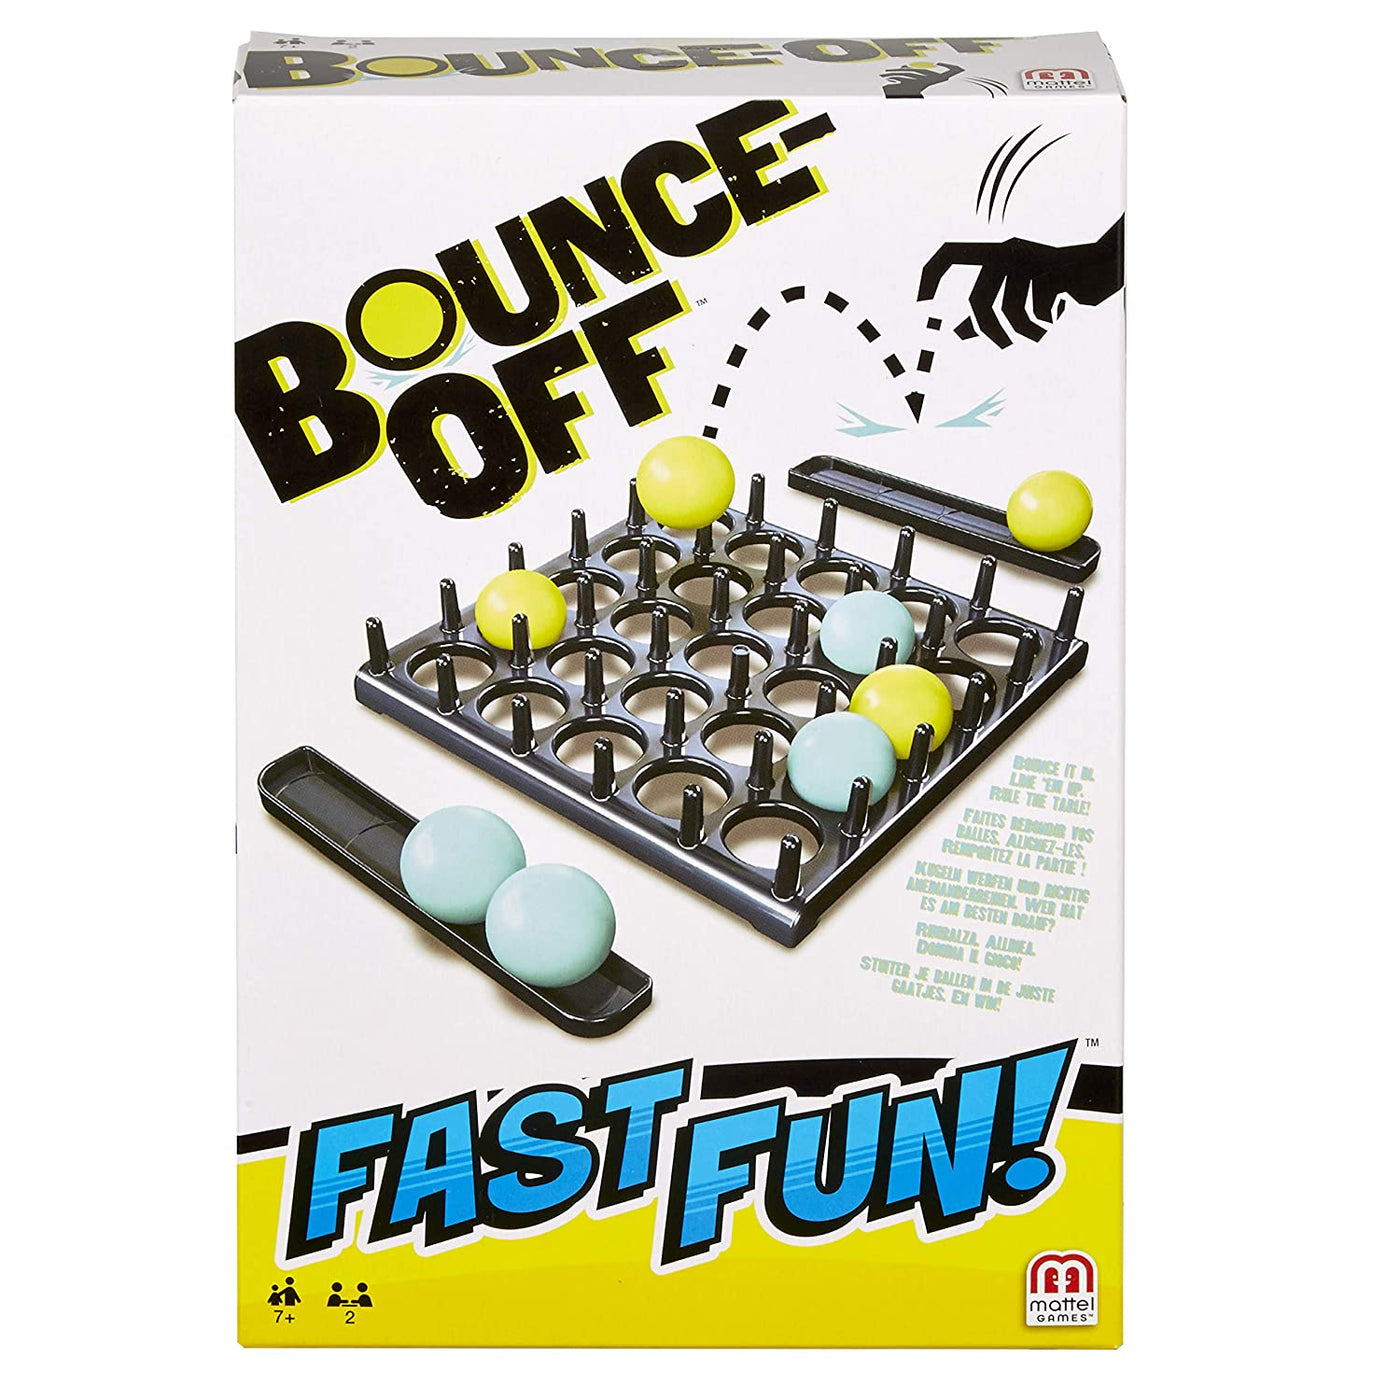 Bounce Off- Fast Fun (Bounce It In, Line'em Up, Rule The Table) | Mattel Games